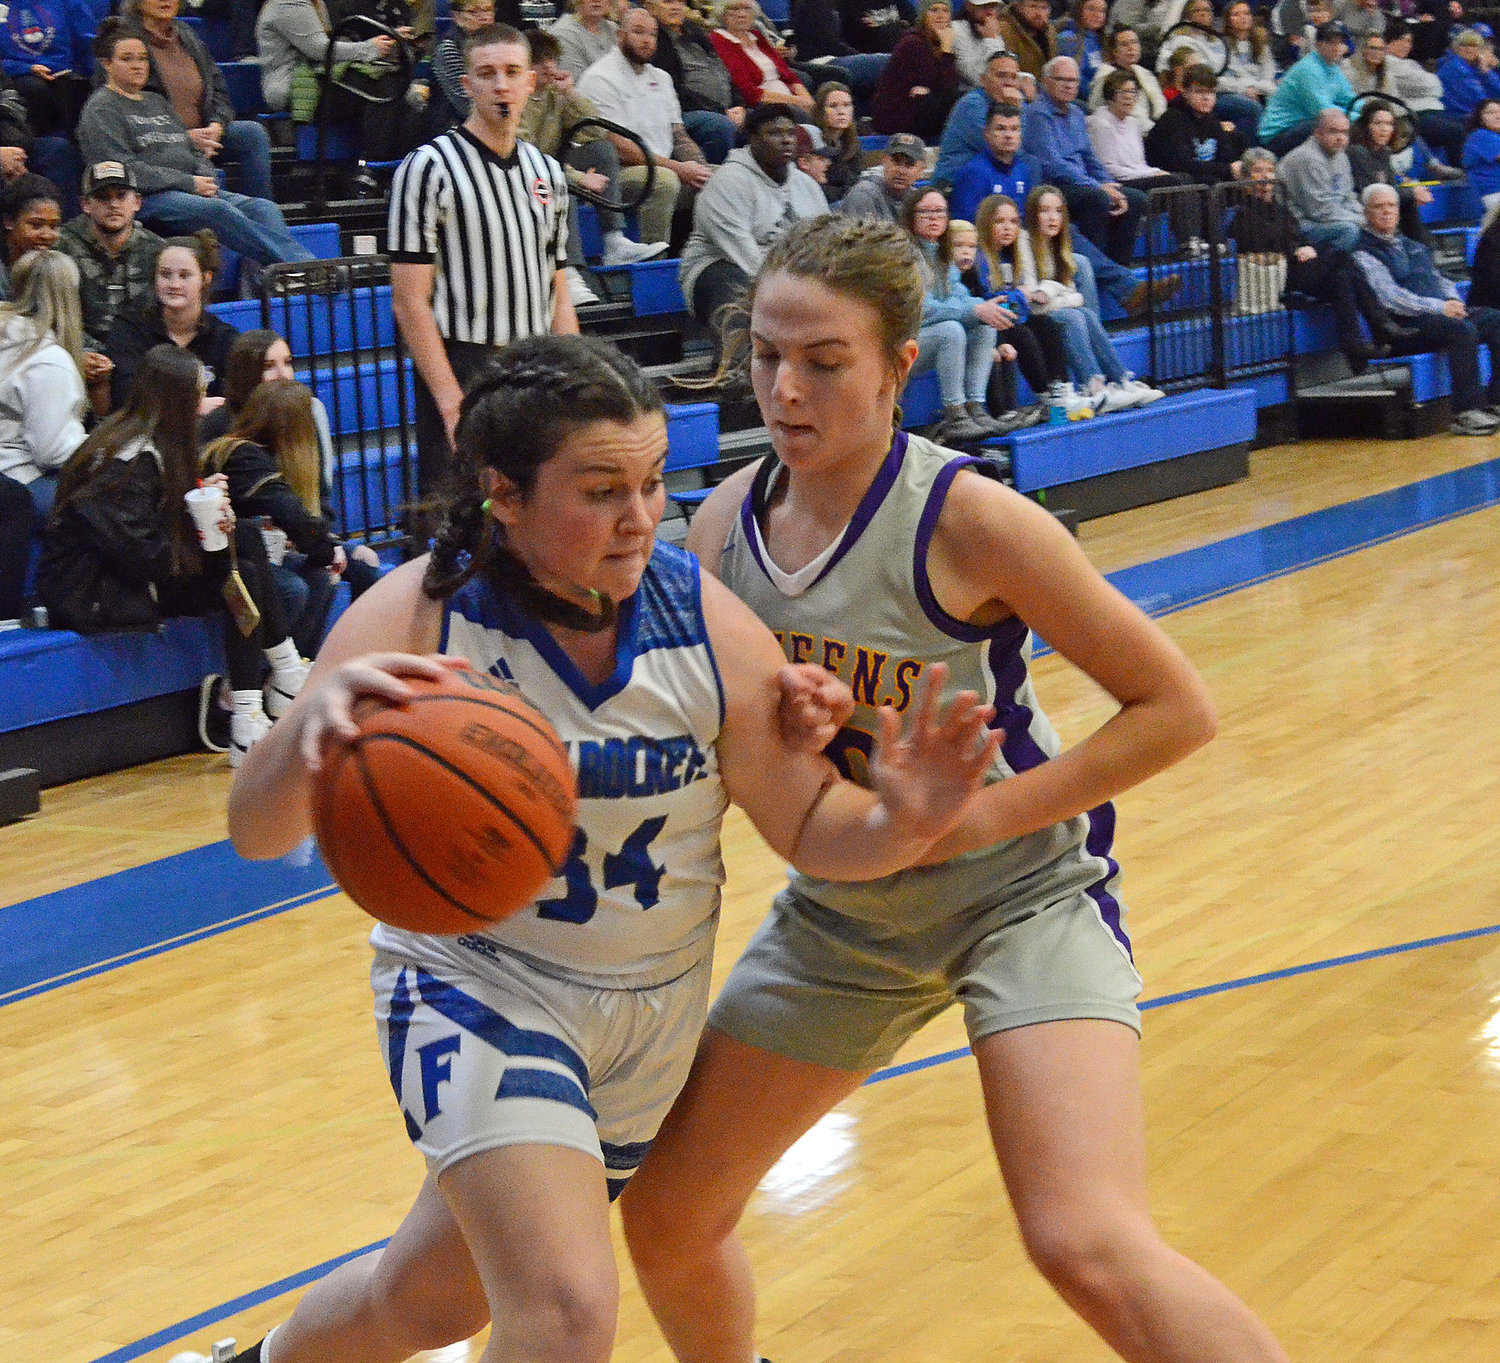 Carli Warner (34) drives the baseline for the Lady Rockets, who lost 48-29 to the Community Viqueens in Friday night’s District 7-AA opener at Forrest.